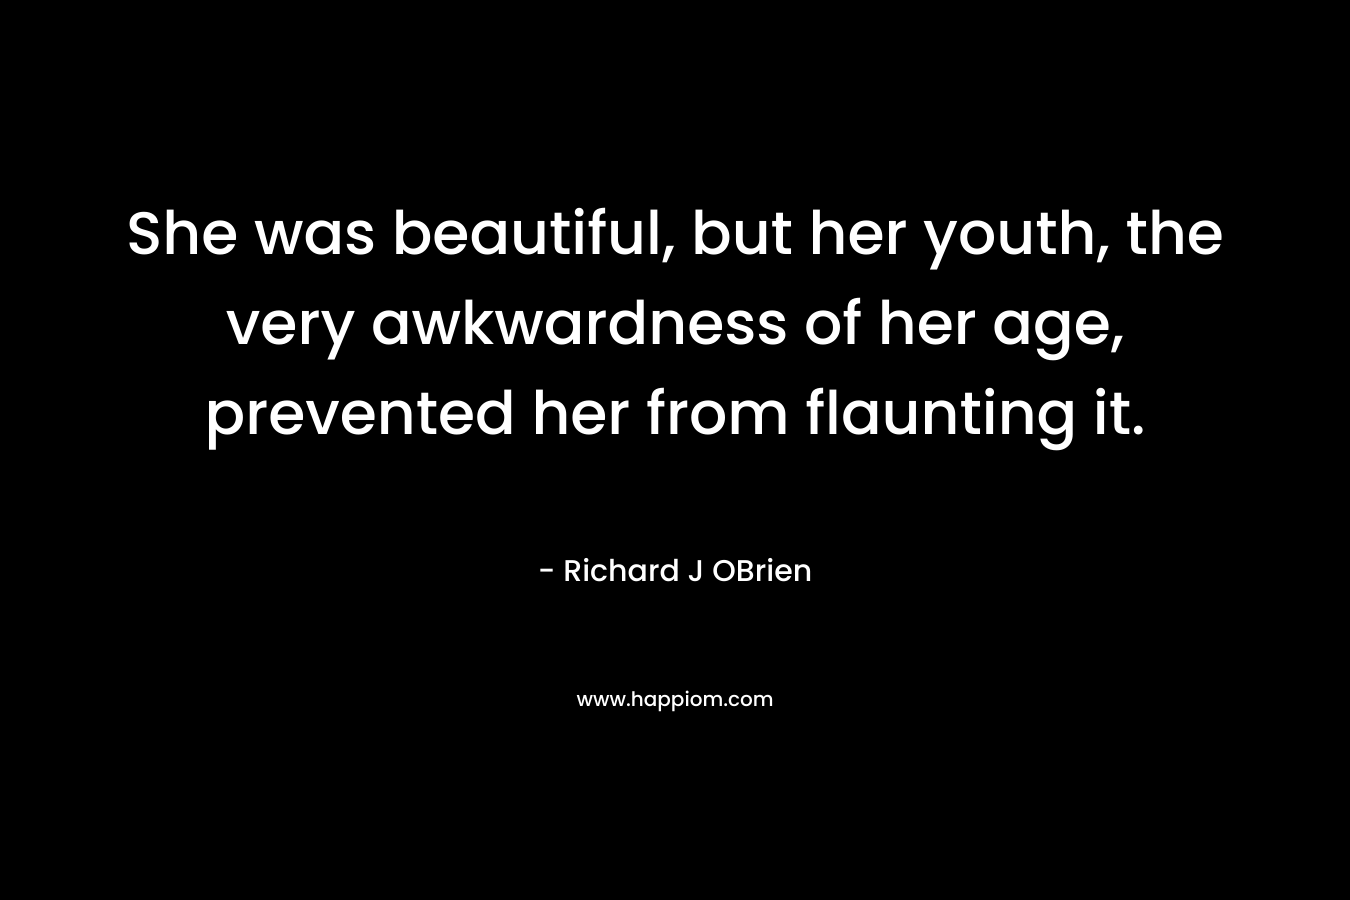 She was beautiful, but her youth, the very awkwardness of her age, prevented her from flaunting it. – Richard J  OBrien